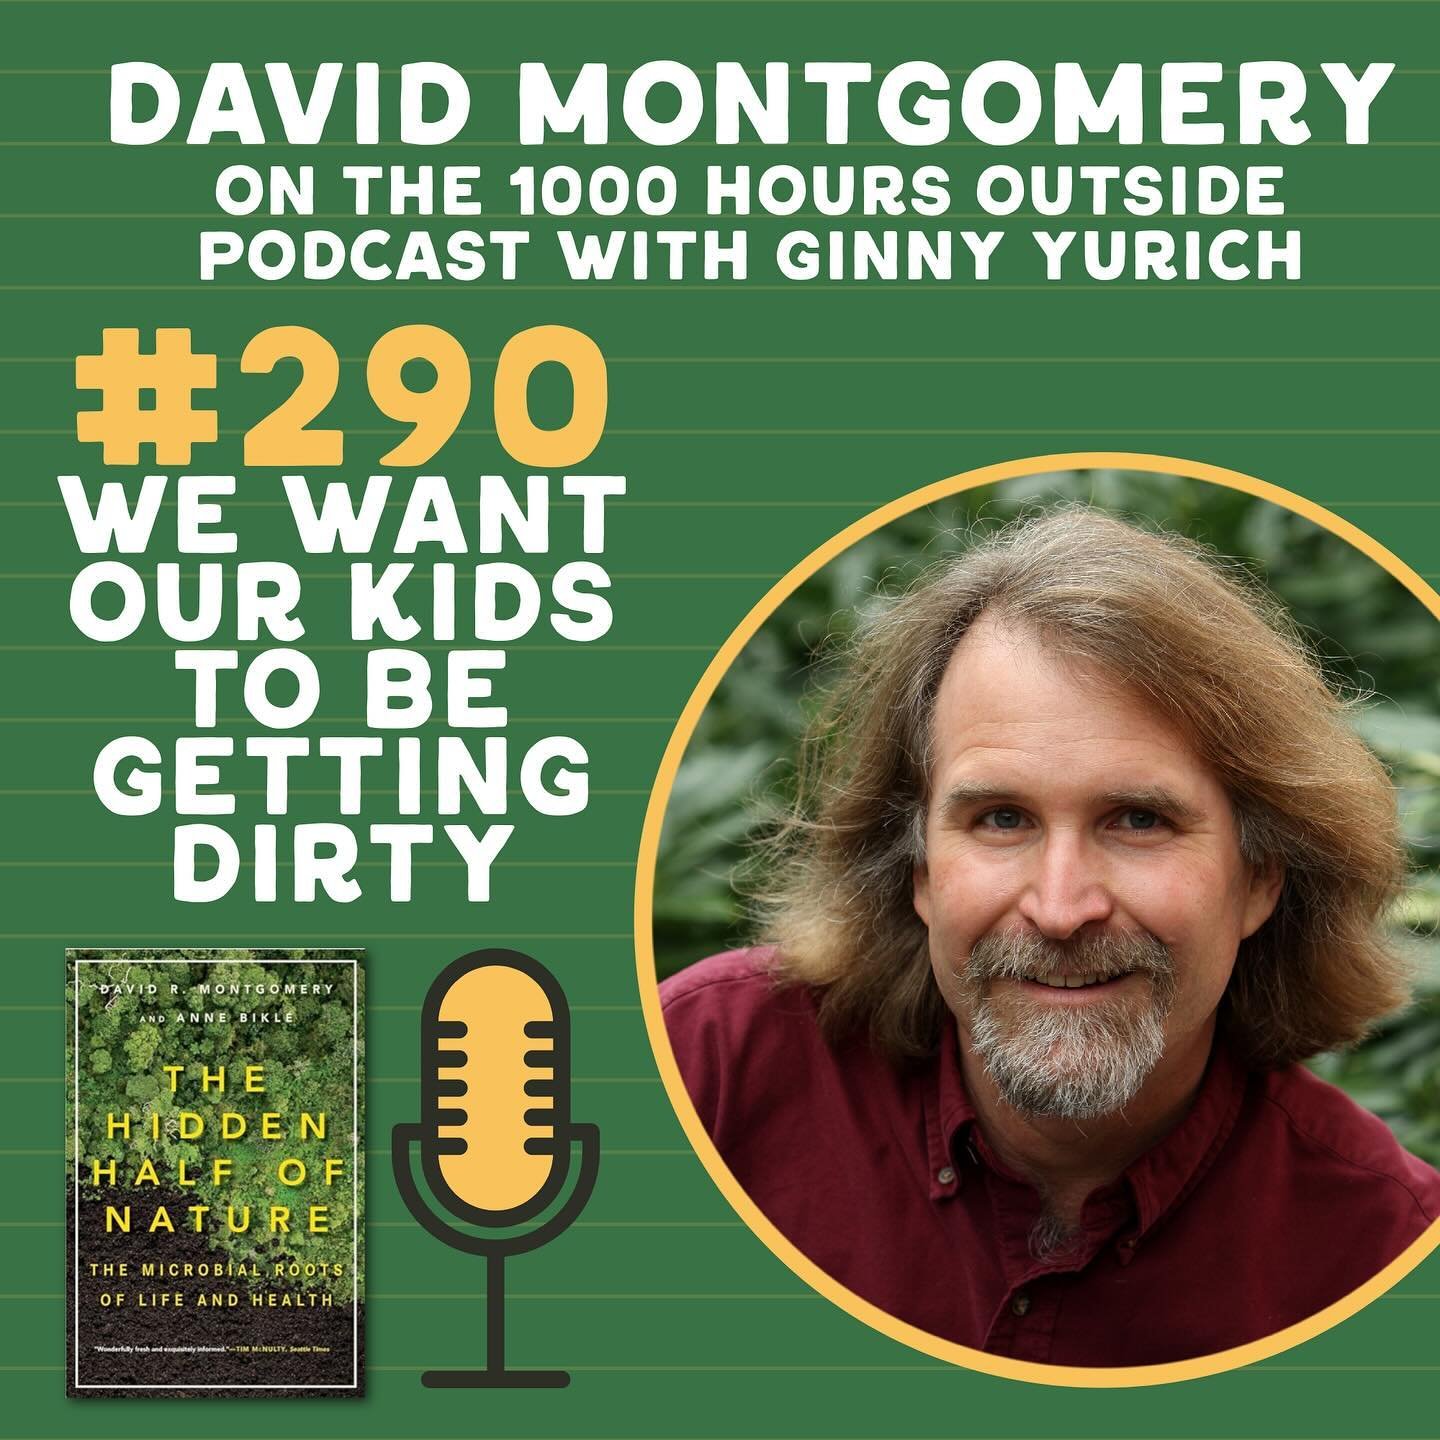 Spread the word!!! ➡️

This episode is fascinating beyond fascinating and will help you with your summer planning. Kids who play in dirt (clean dirt that is pesticide free) build robust immune systems. We&rsquo;re talking all things gardening and mic